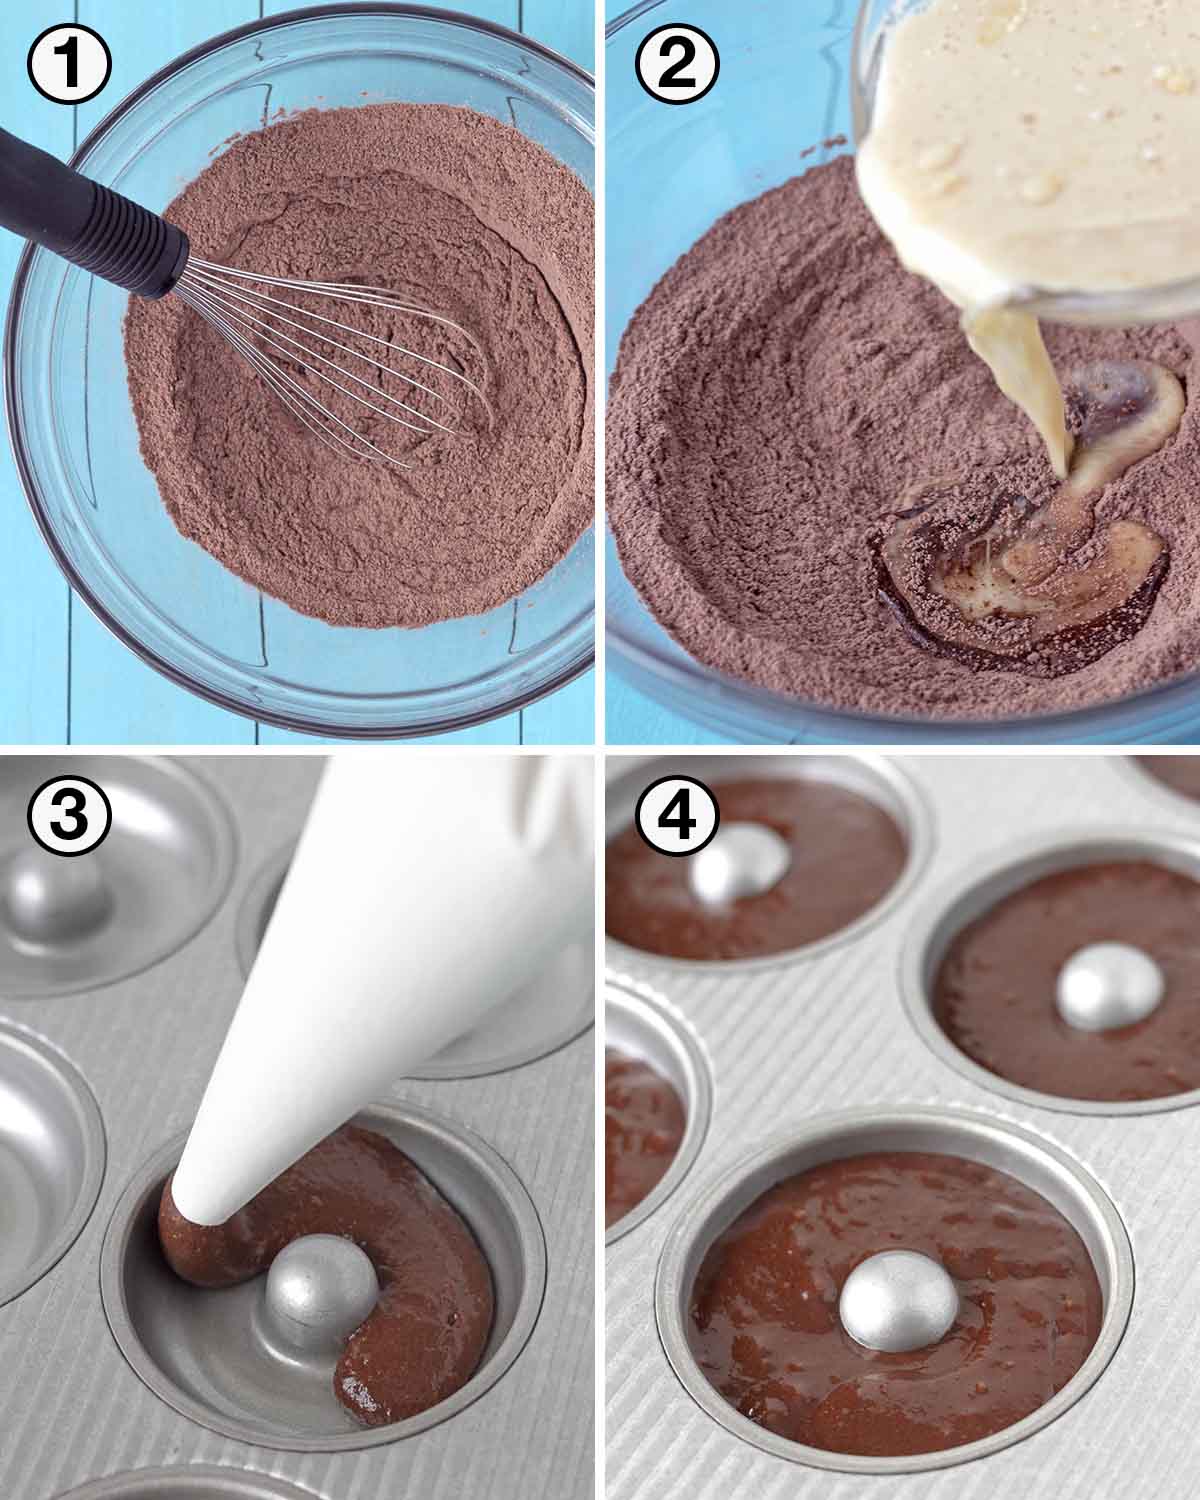 A collage of four images showing the first sequence of steps needed to make vegan gluten-free chocolate doughnuts.